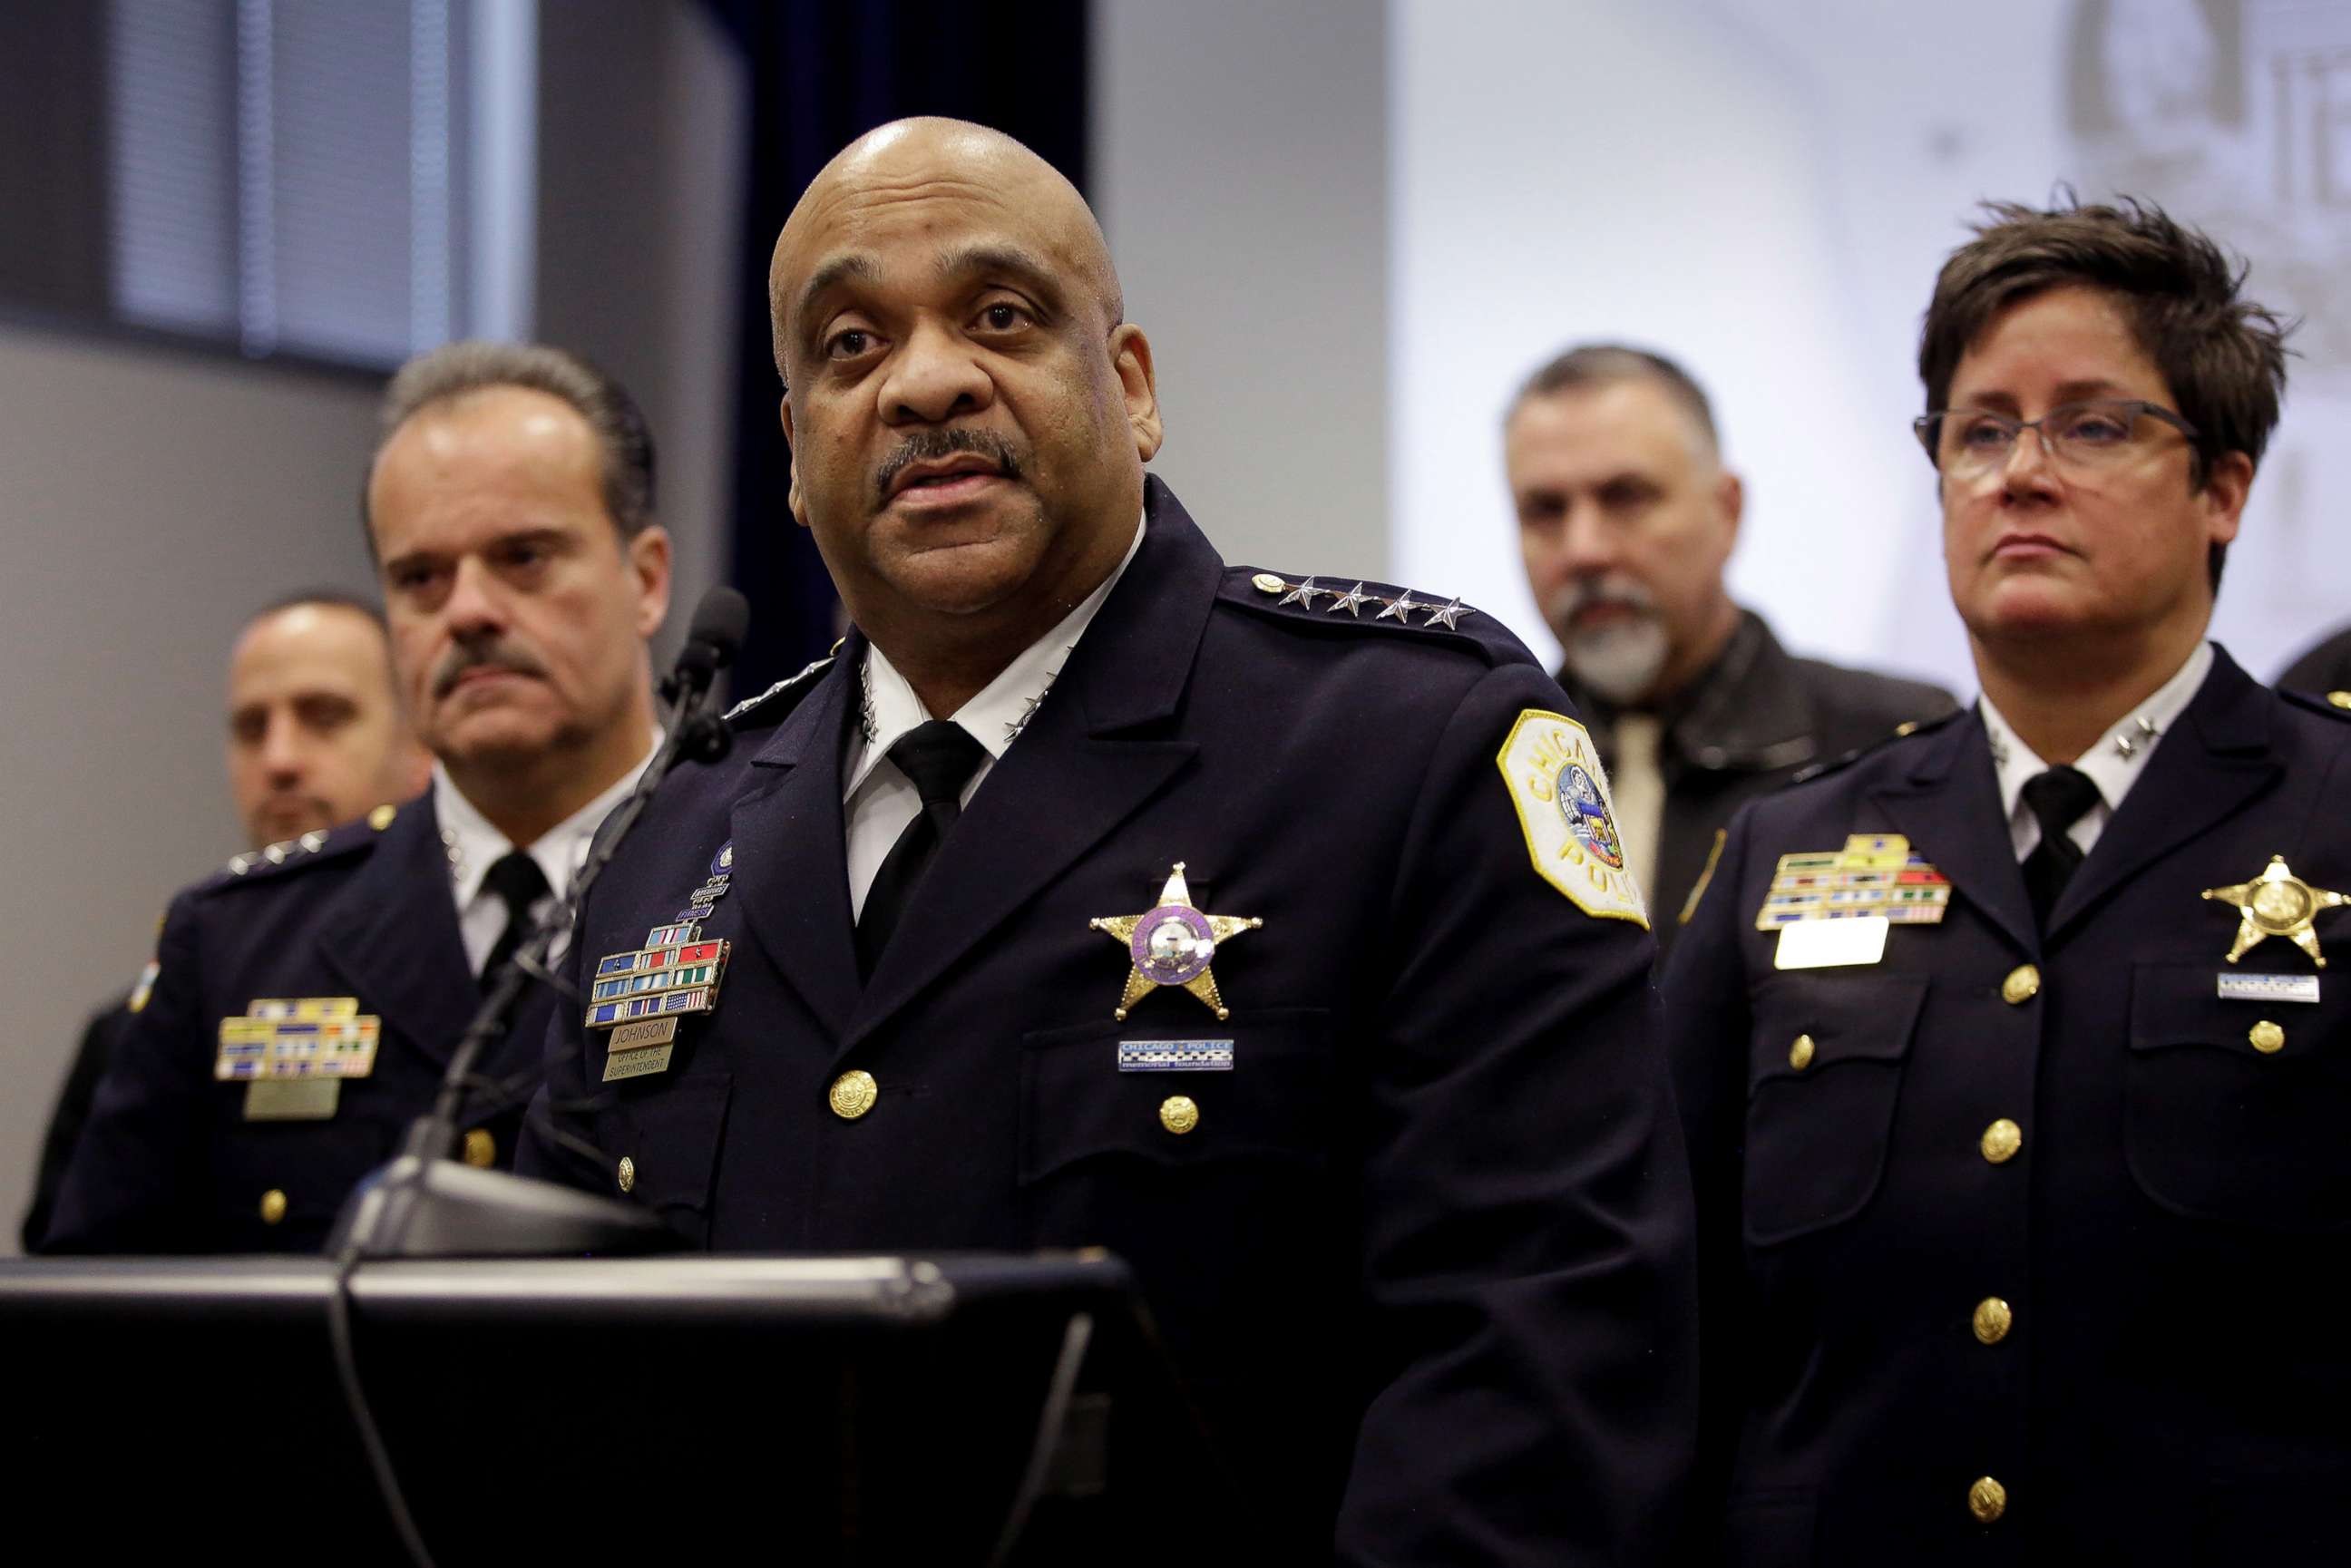 PHOTO: Chicago Police Superintendent Eddie Johnson speaks about the Jussie Smollett case at a news conference at Chicago Police headquarters in Chicago, Illinois, Feb. 21, 2019.